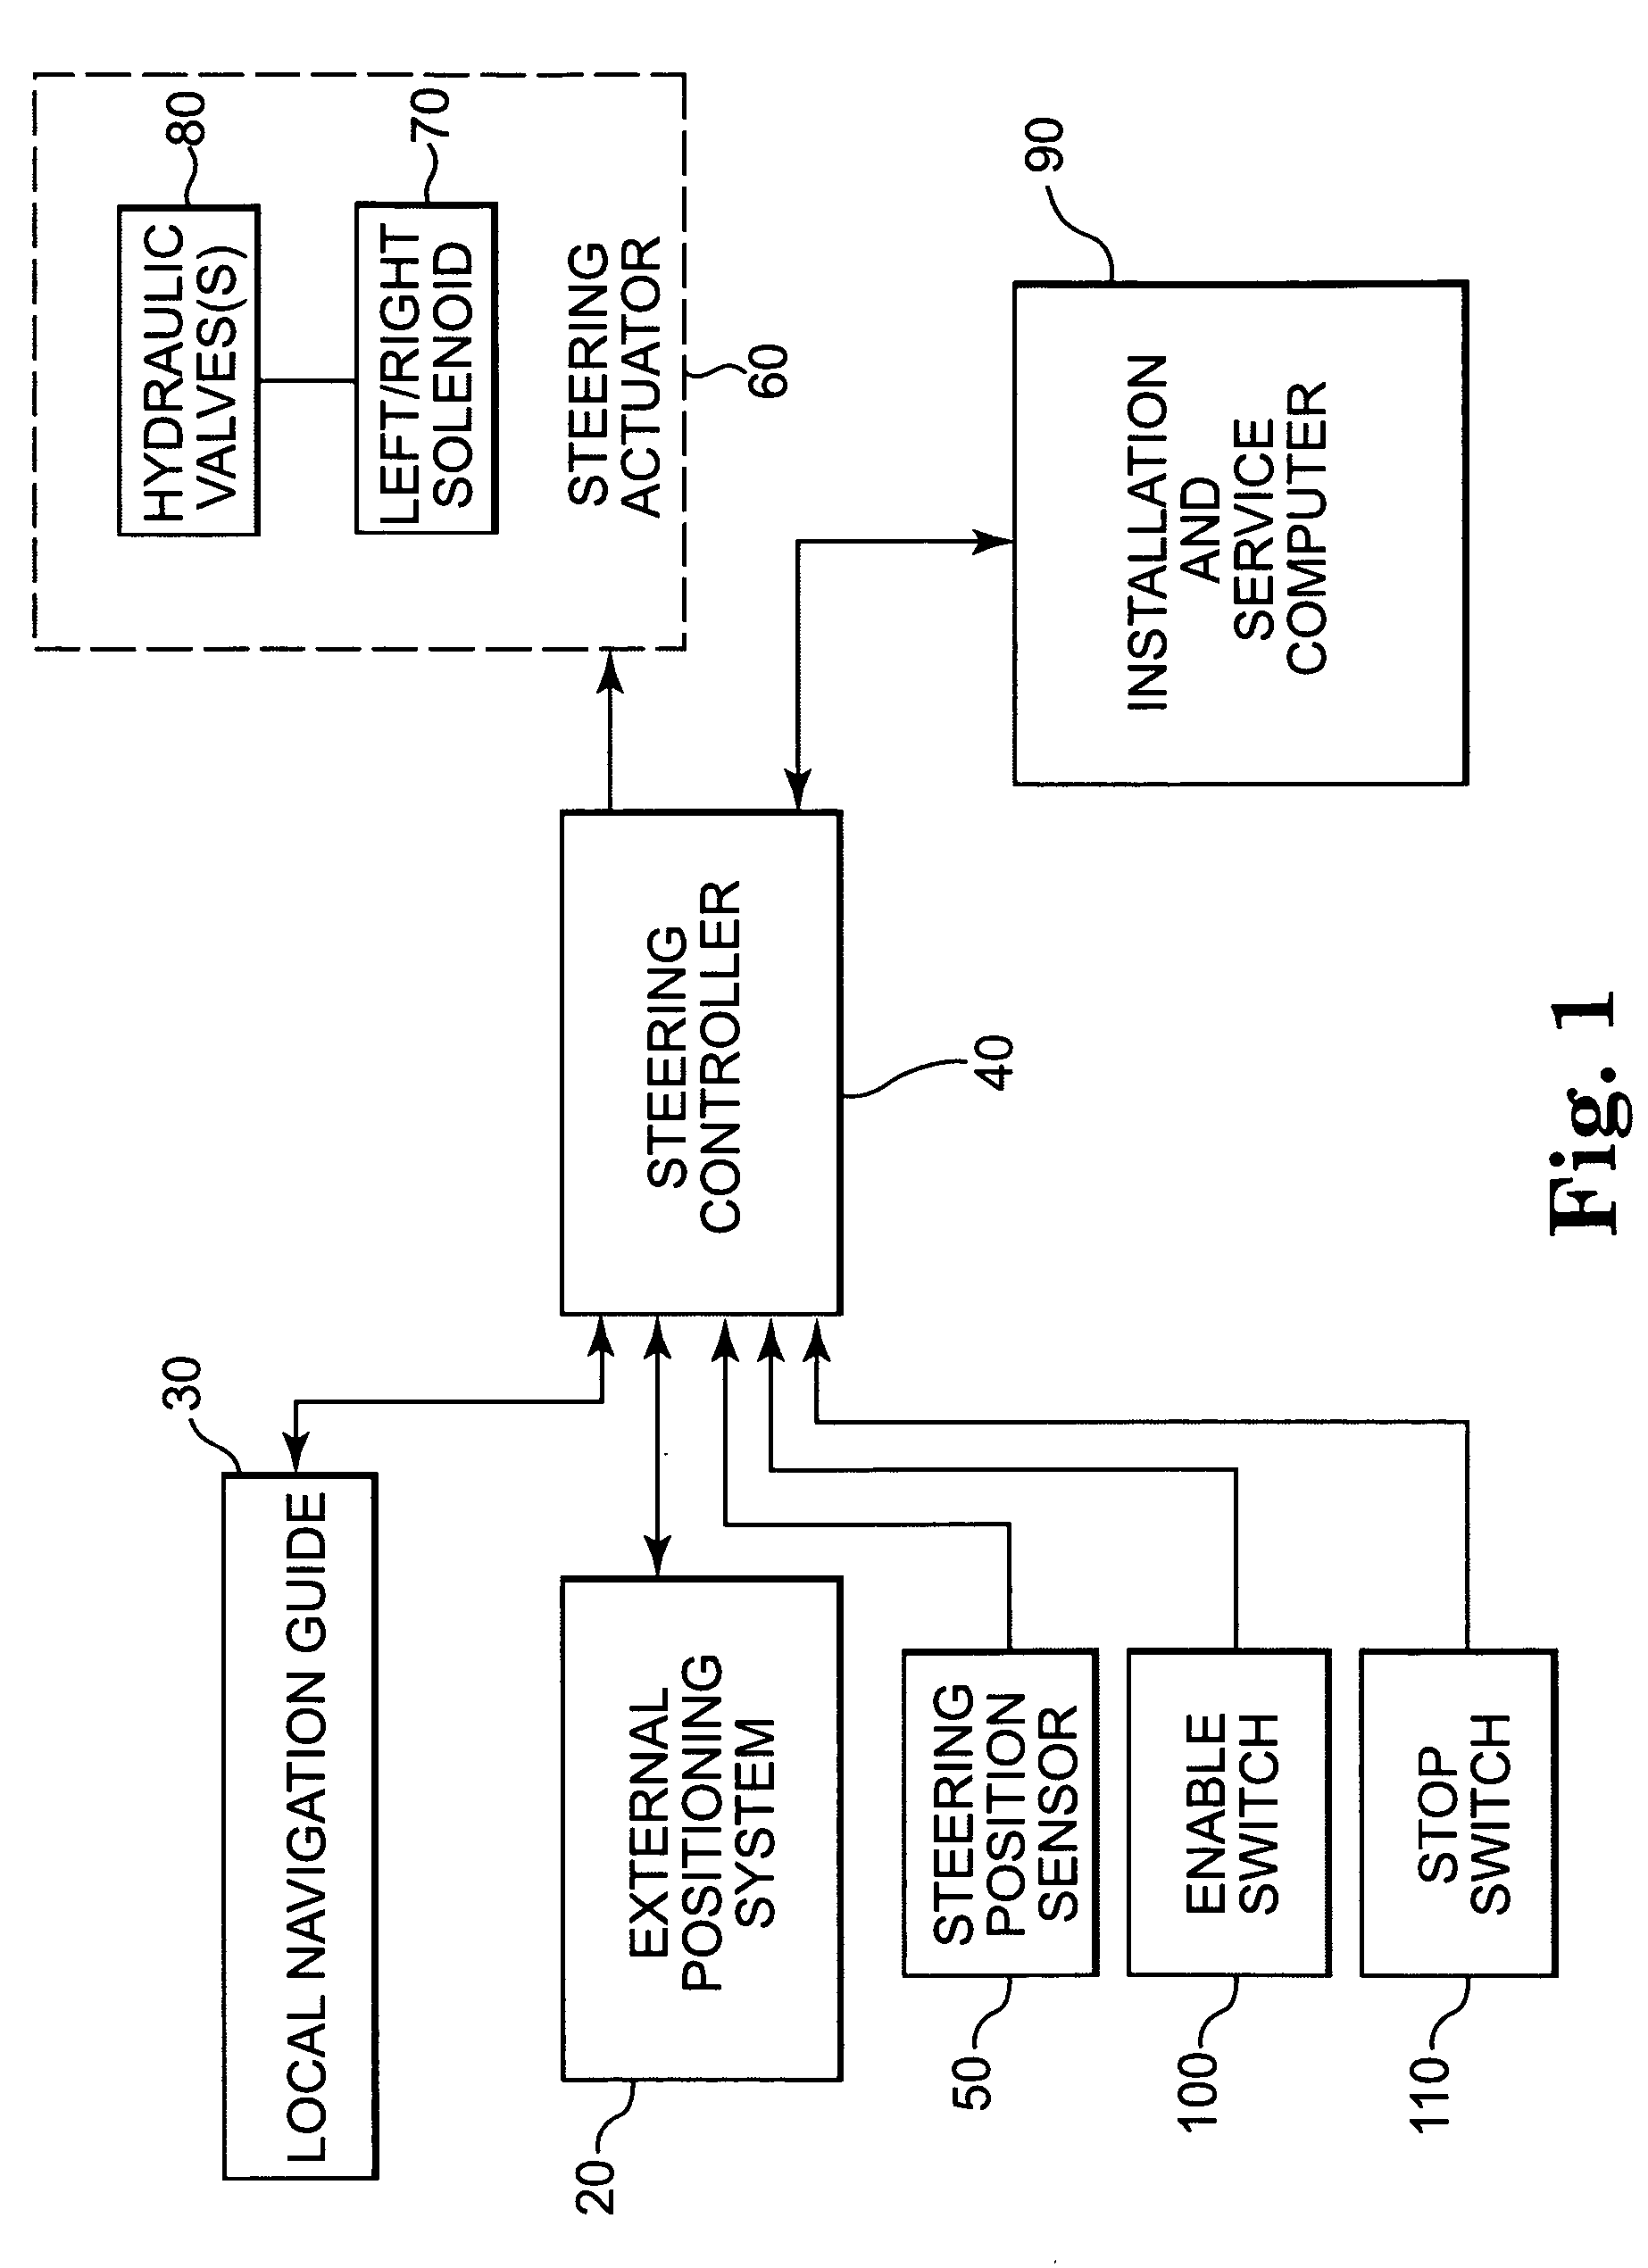 Architecturally partitioned automatic steering system and method